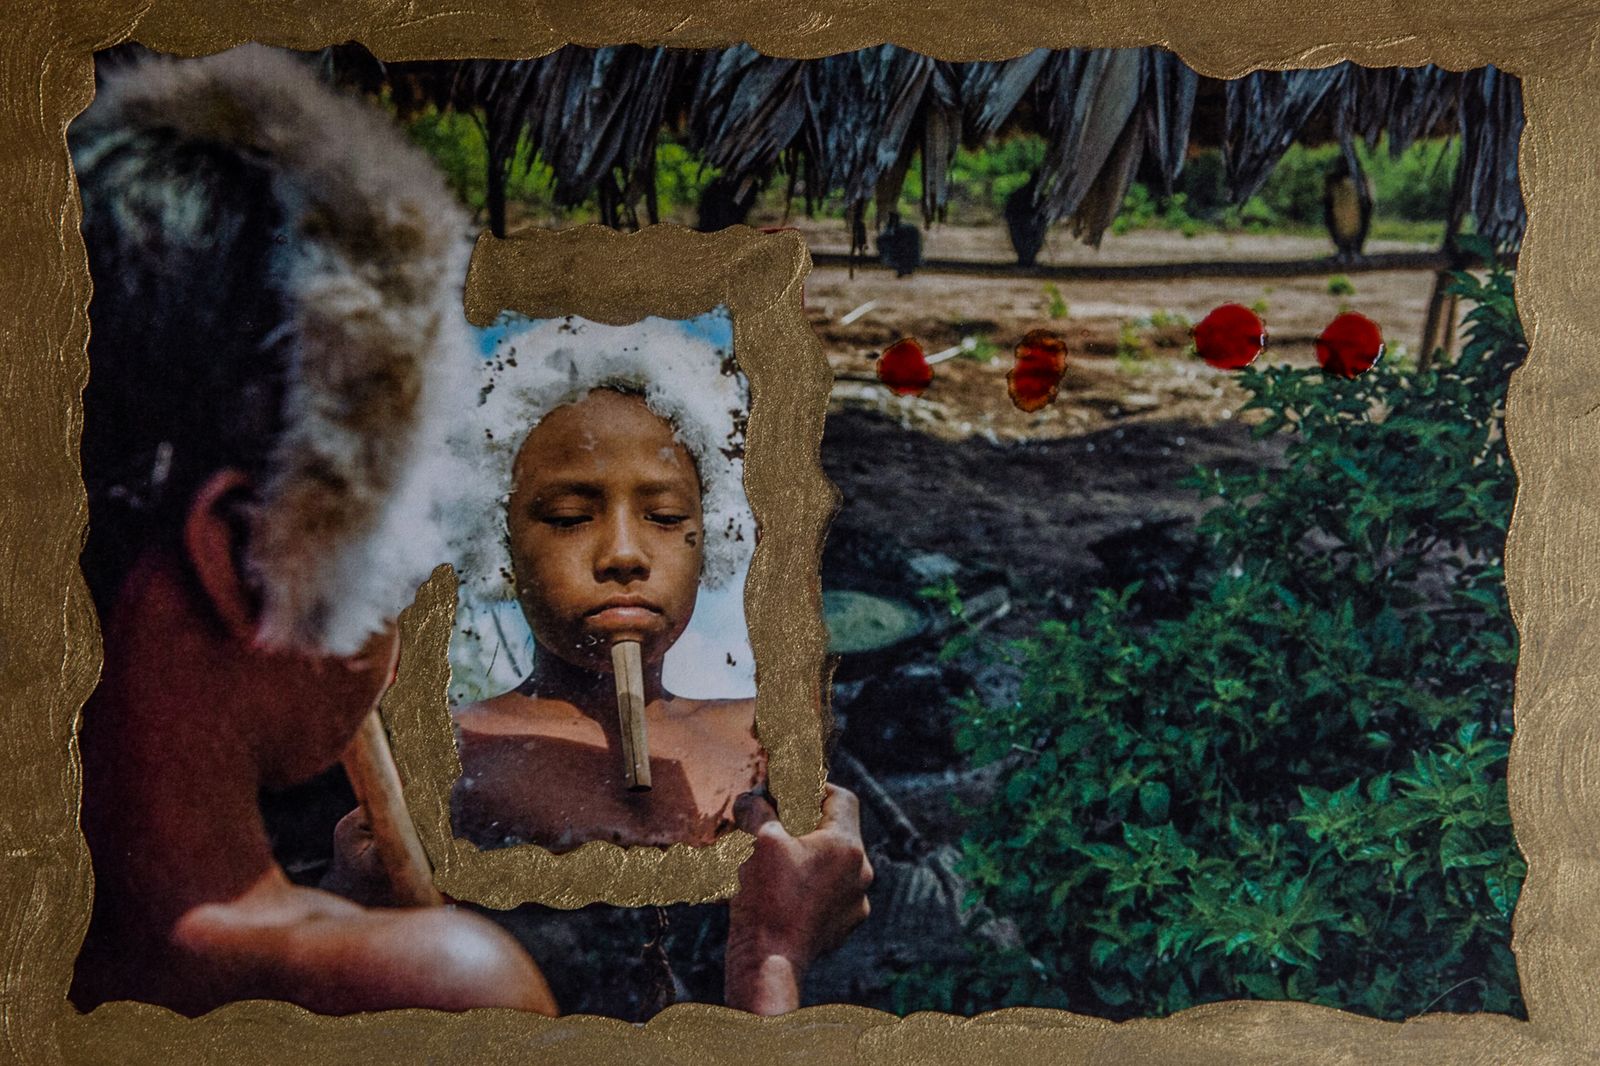 © Leticia Valverdes - Image from the #prayforamazonia photography project